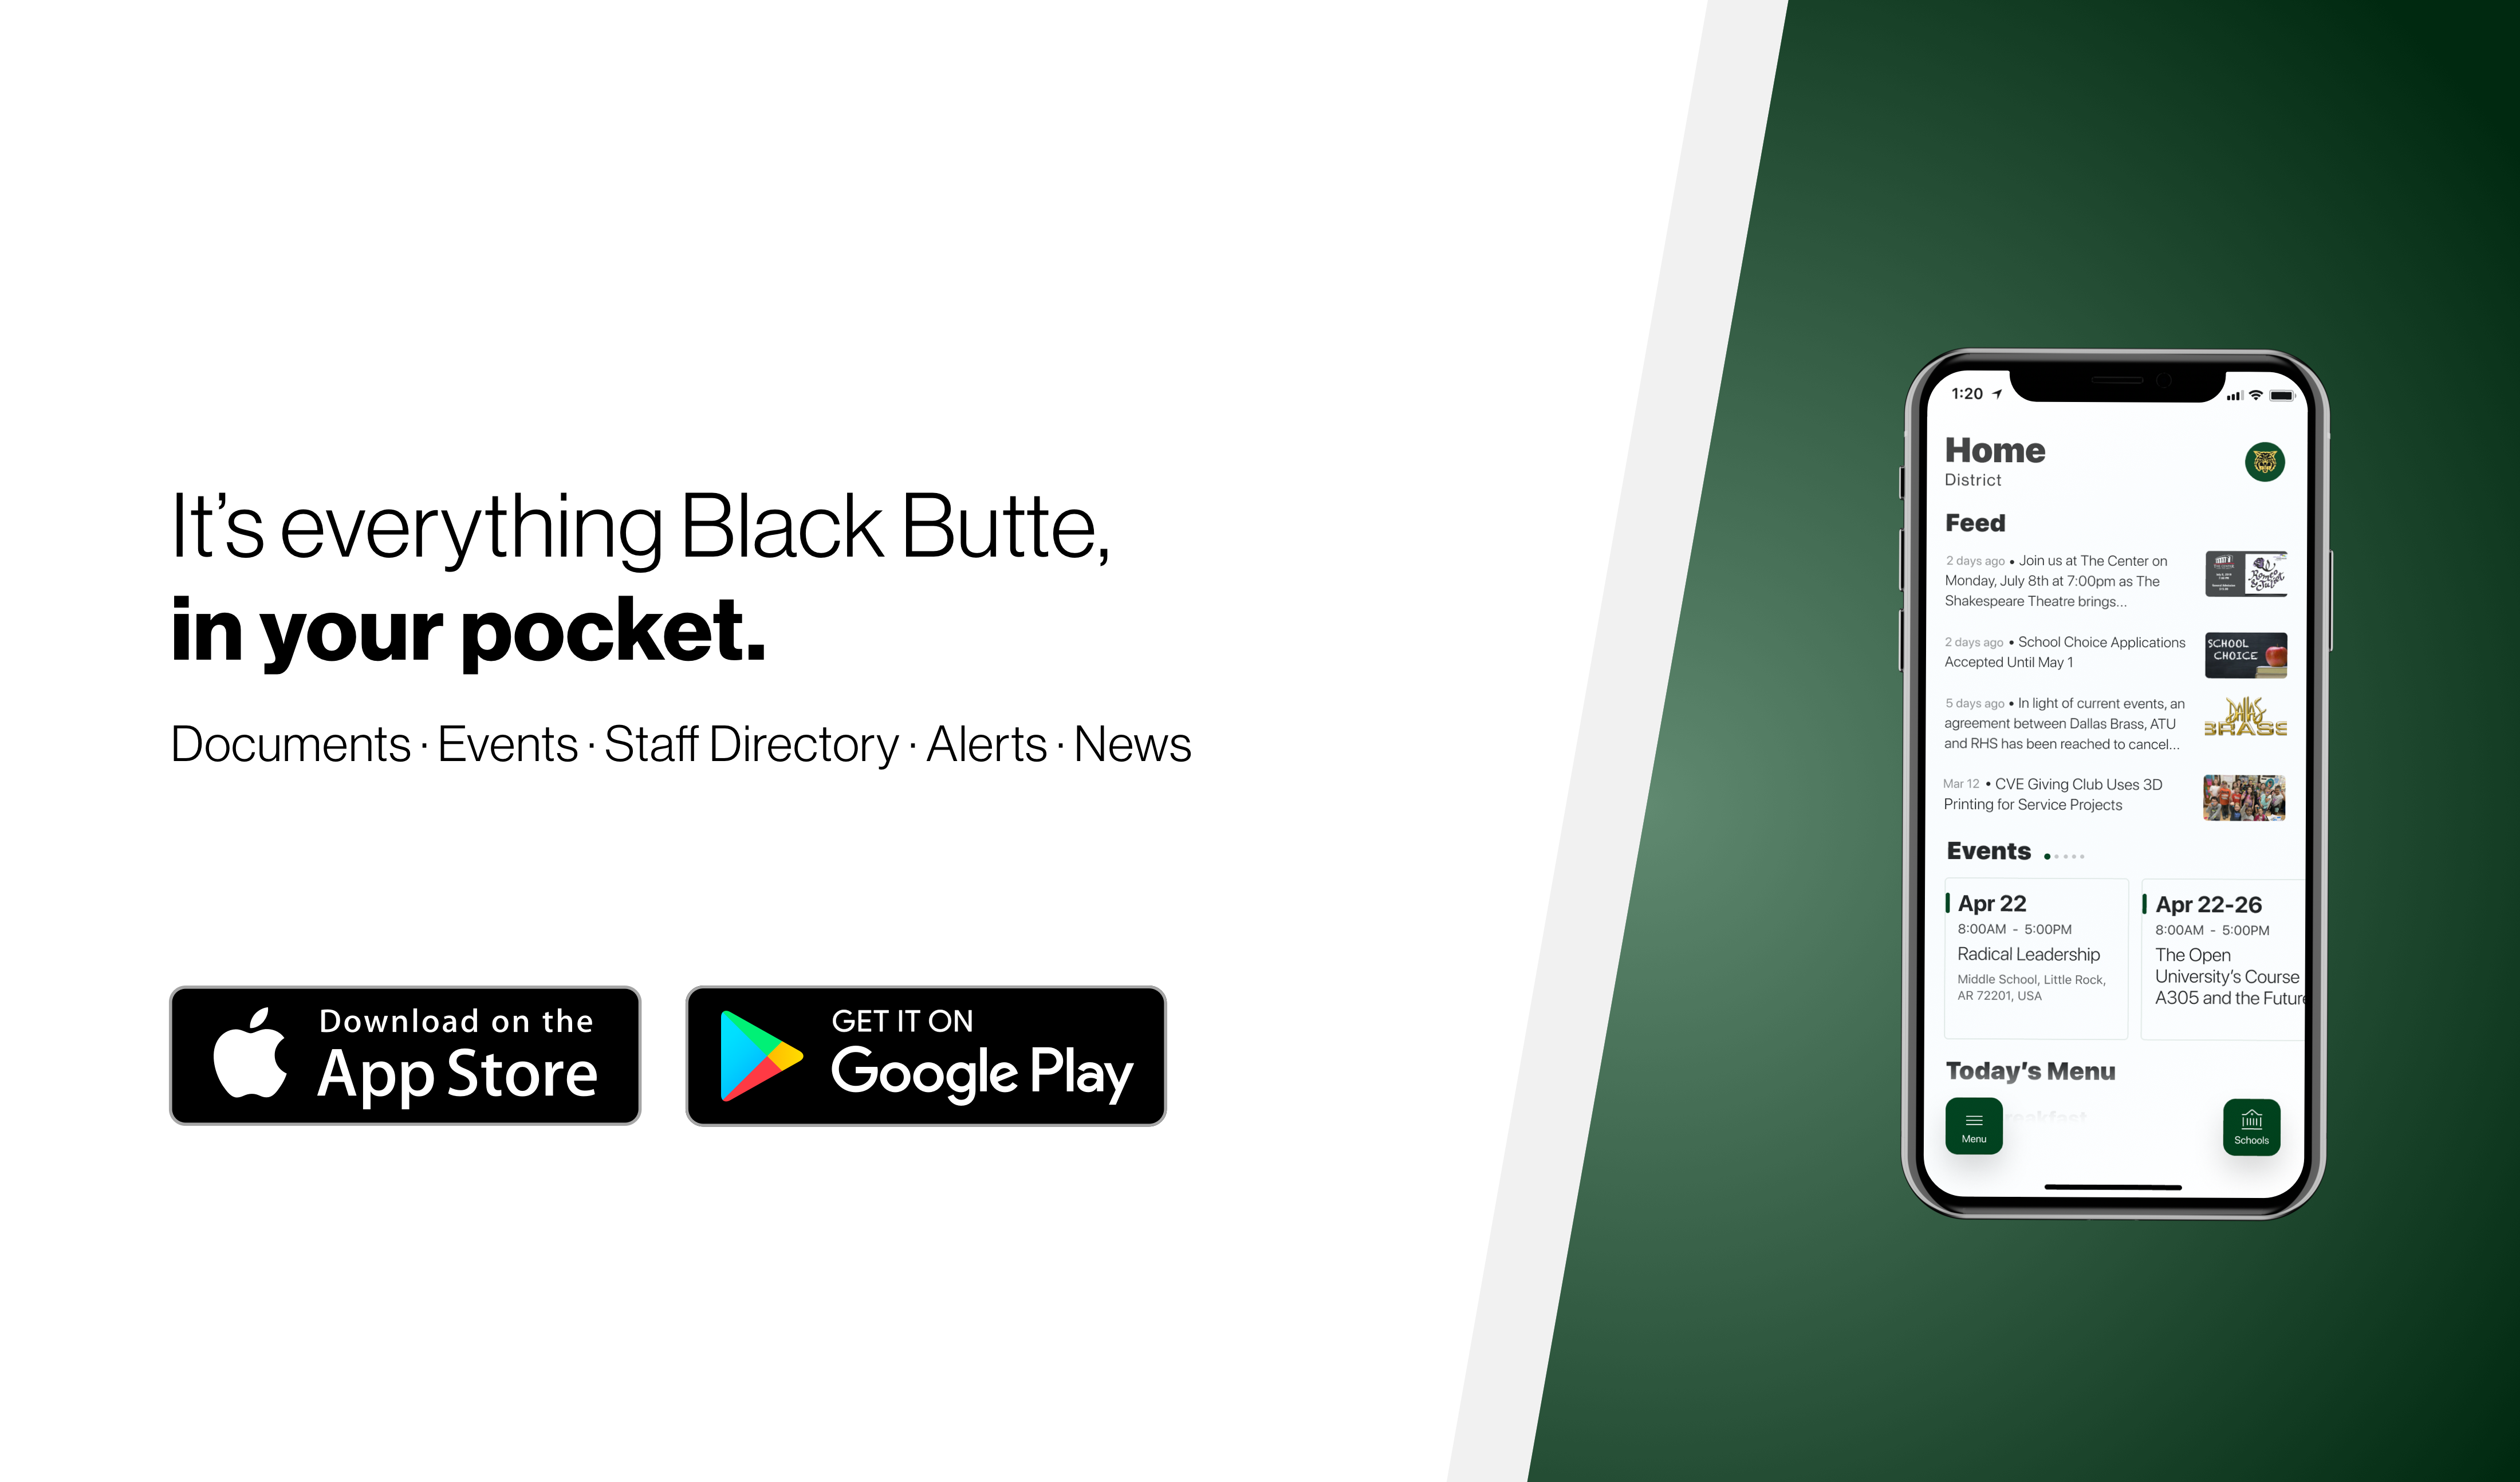 It's everything Black Butte in your pocket!